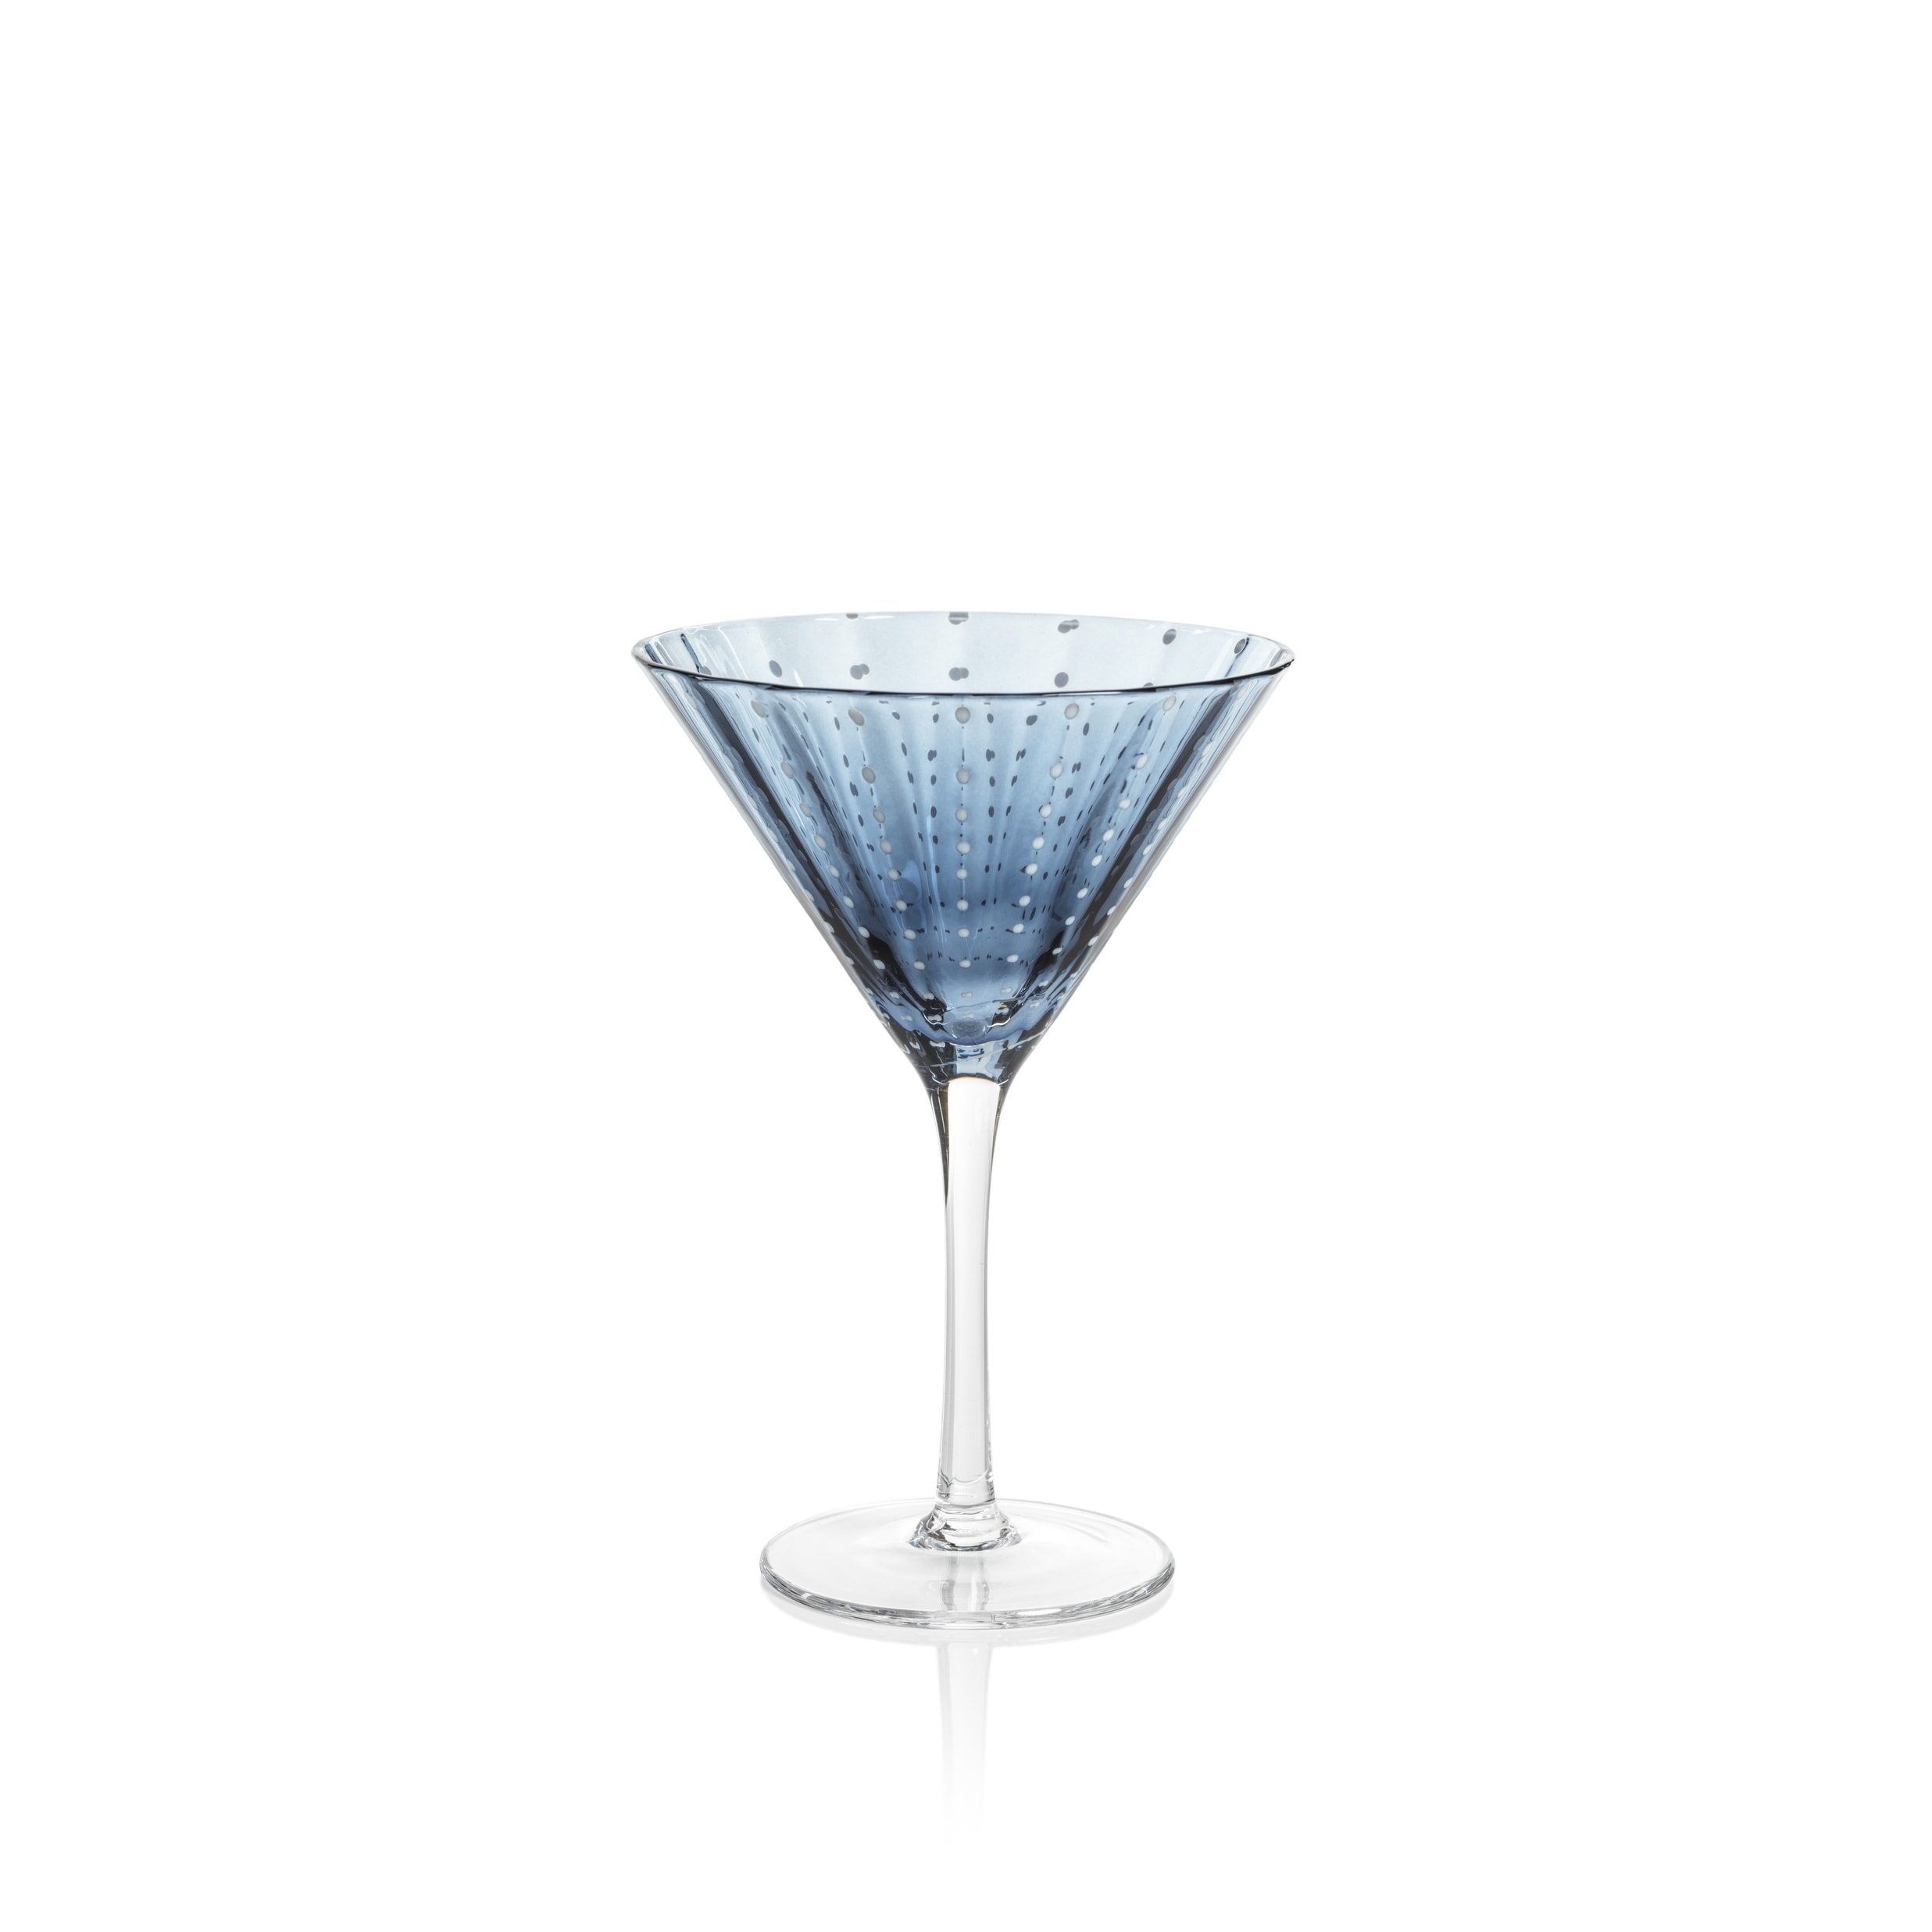 https://ak1.ostkcdn.com/images/products/is/images/direct/f389f0bc083bfda412569b608a8230f7f888c01b/Pescara-White-Dot-Martini-Glasses%2C-Set-of-4.jpg